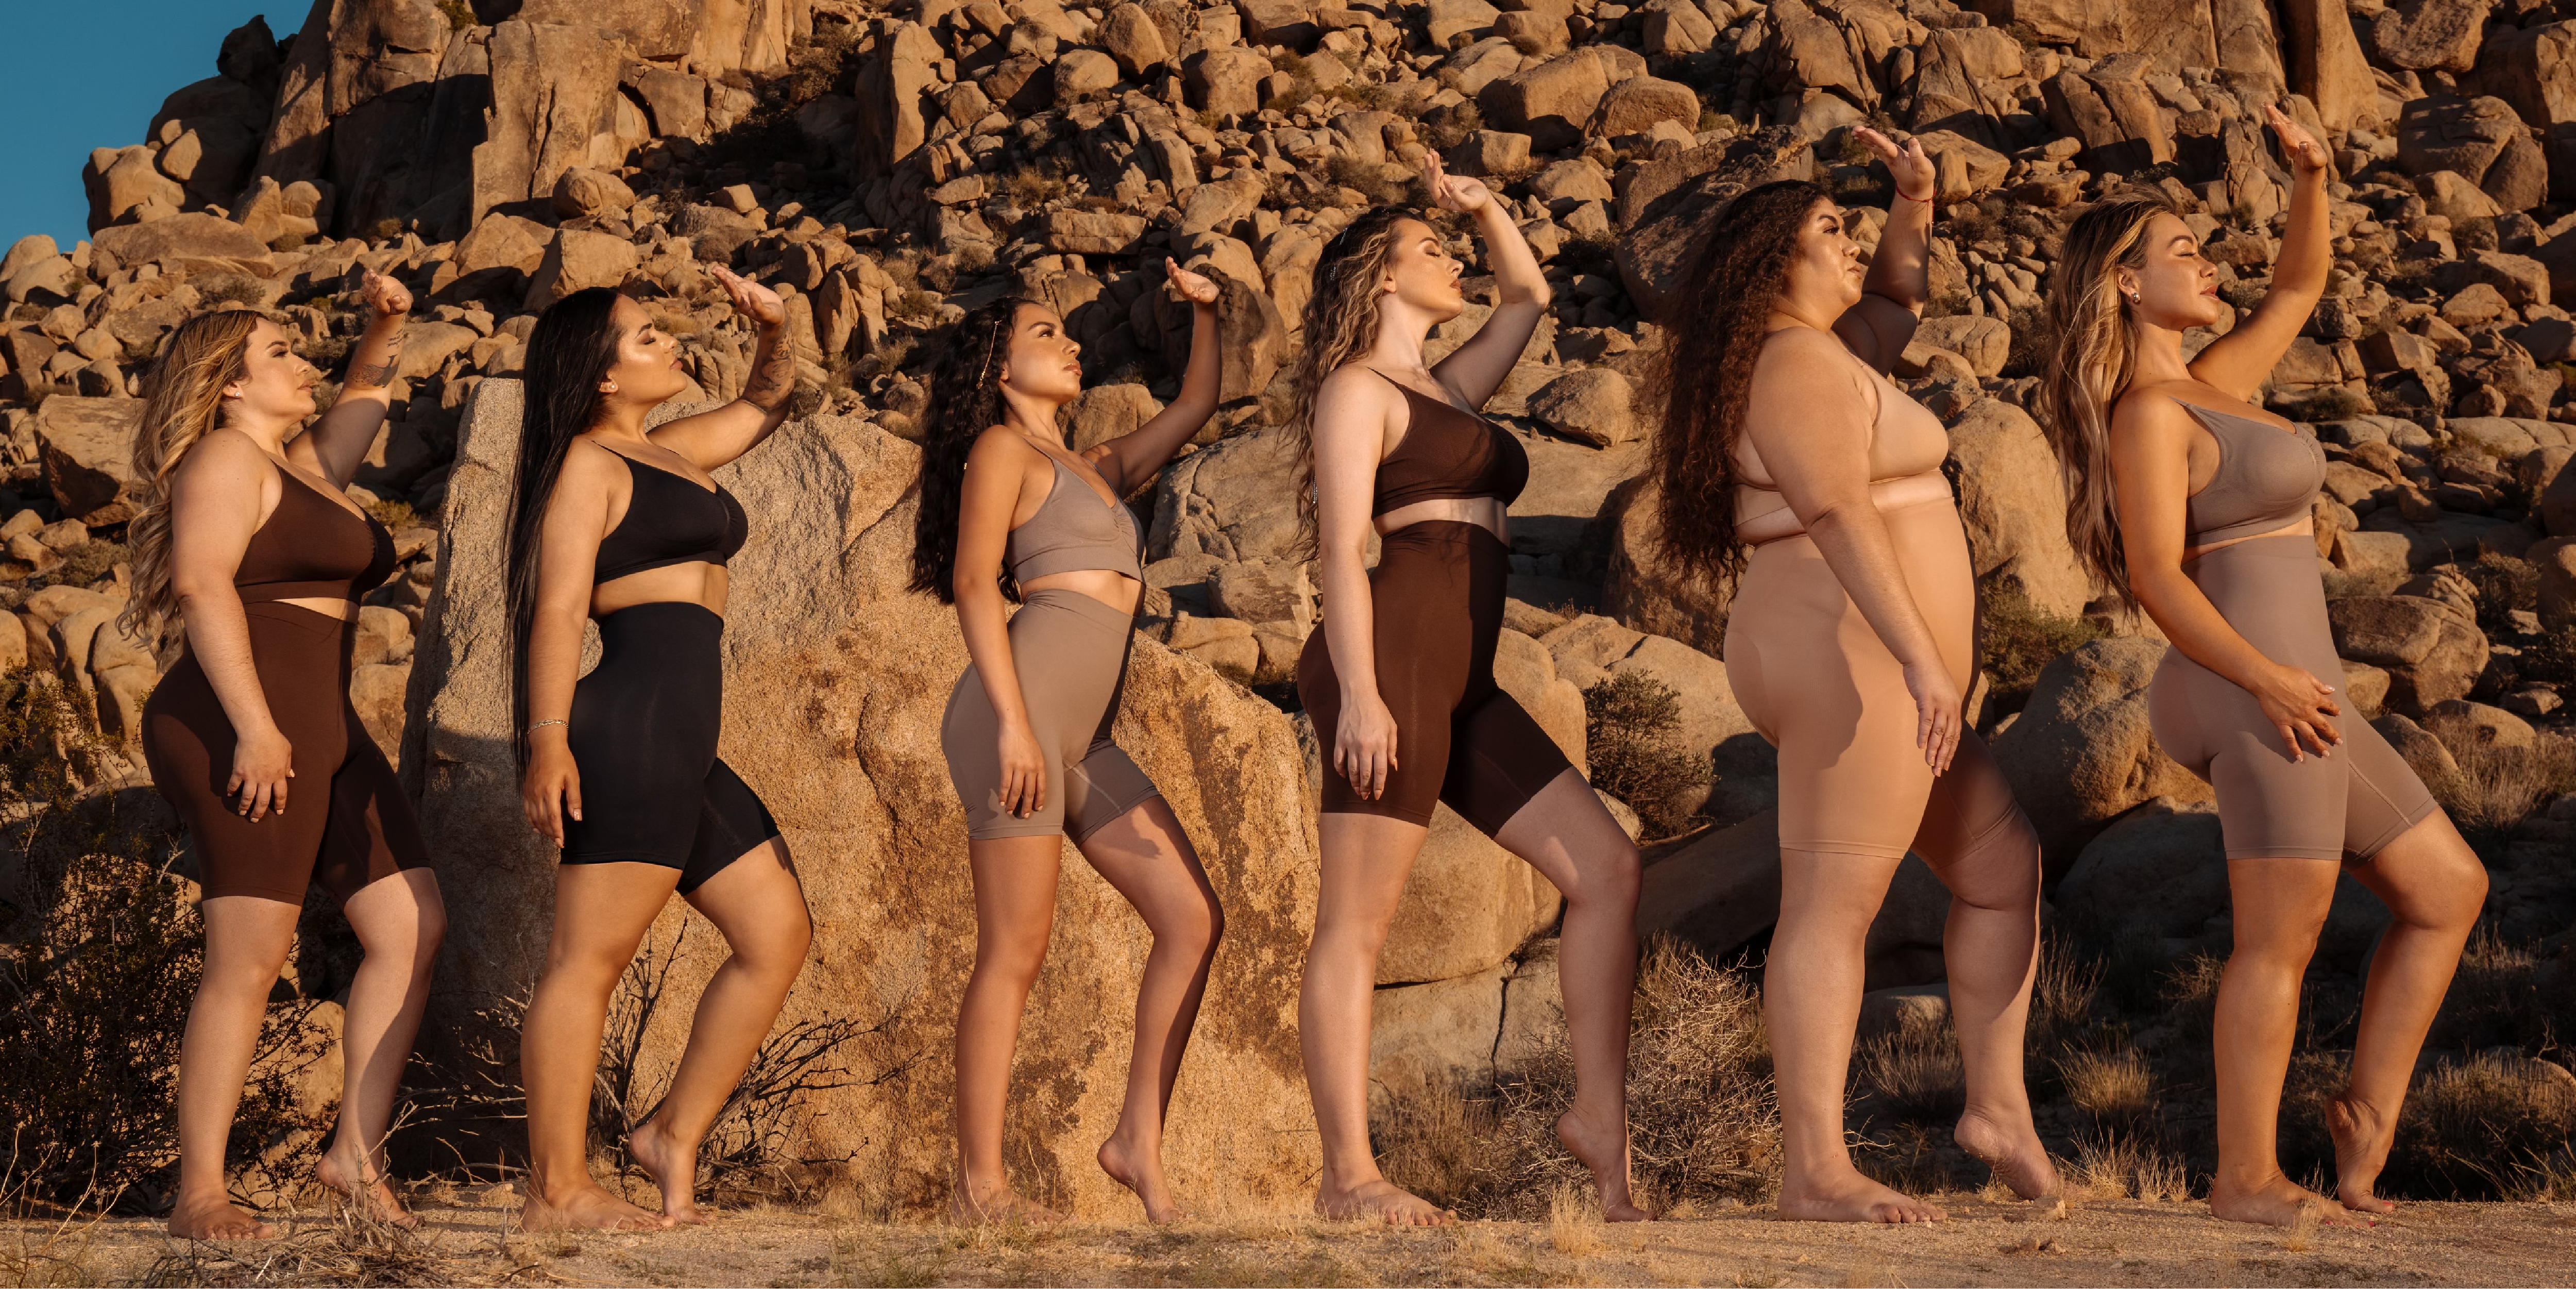 DermawearShapewear is proud to announce the launch of the new